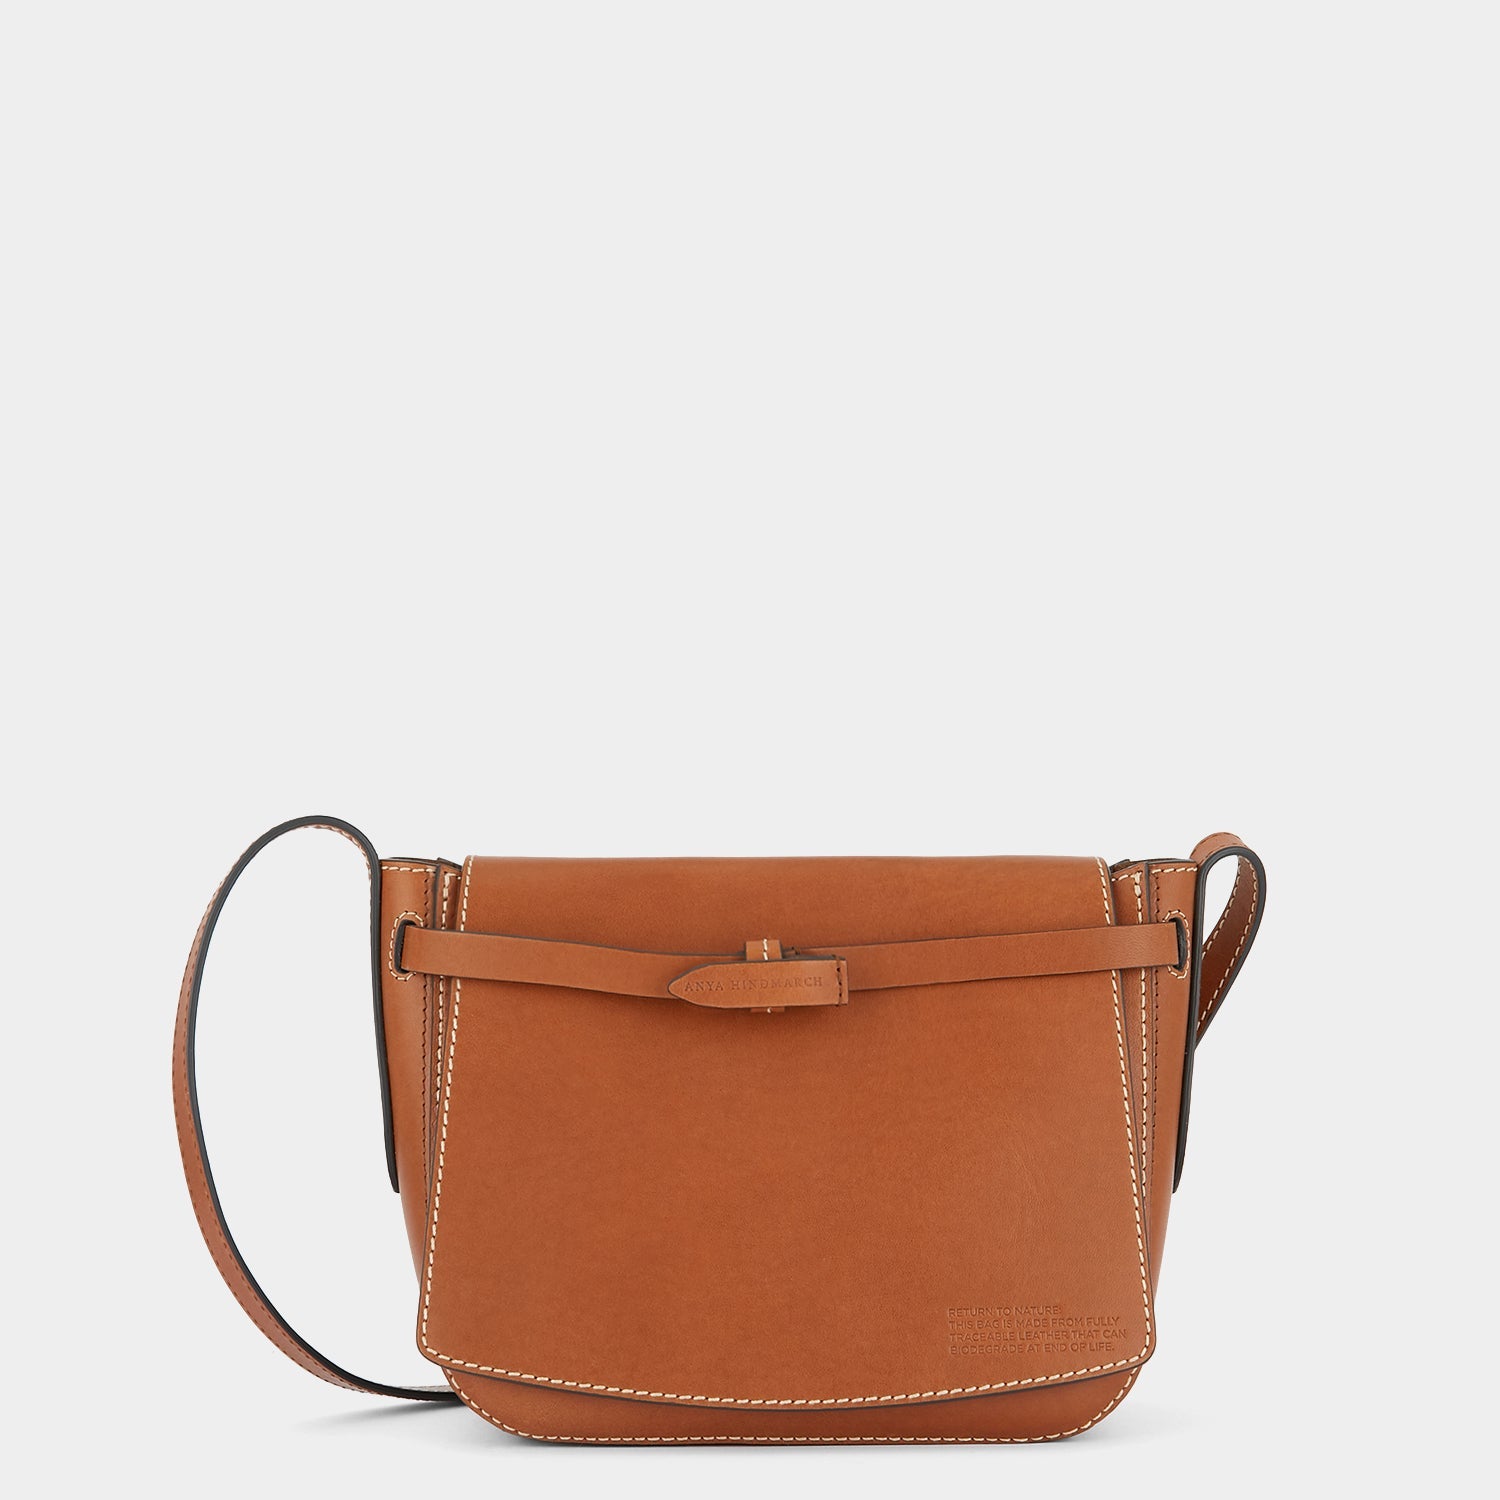 Return to Nature Cross-body -

                  
                    Compostable Leather in Tan -
                  

                  Anya Hindmarch EU
